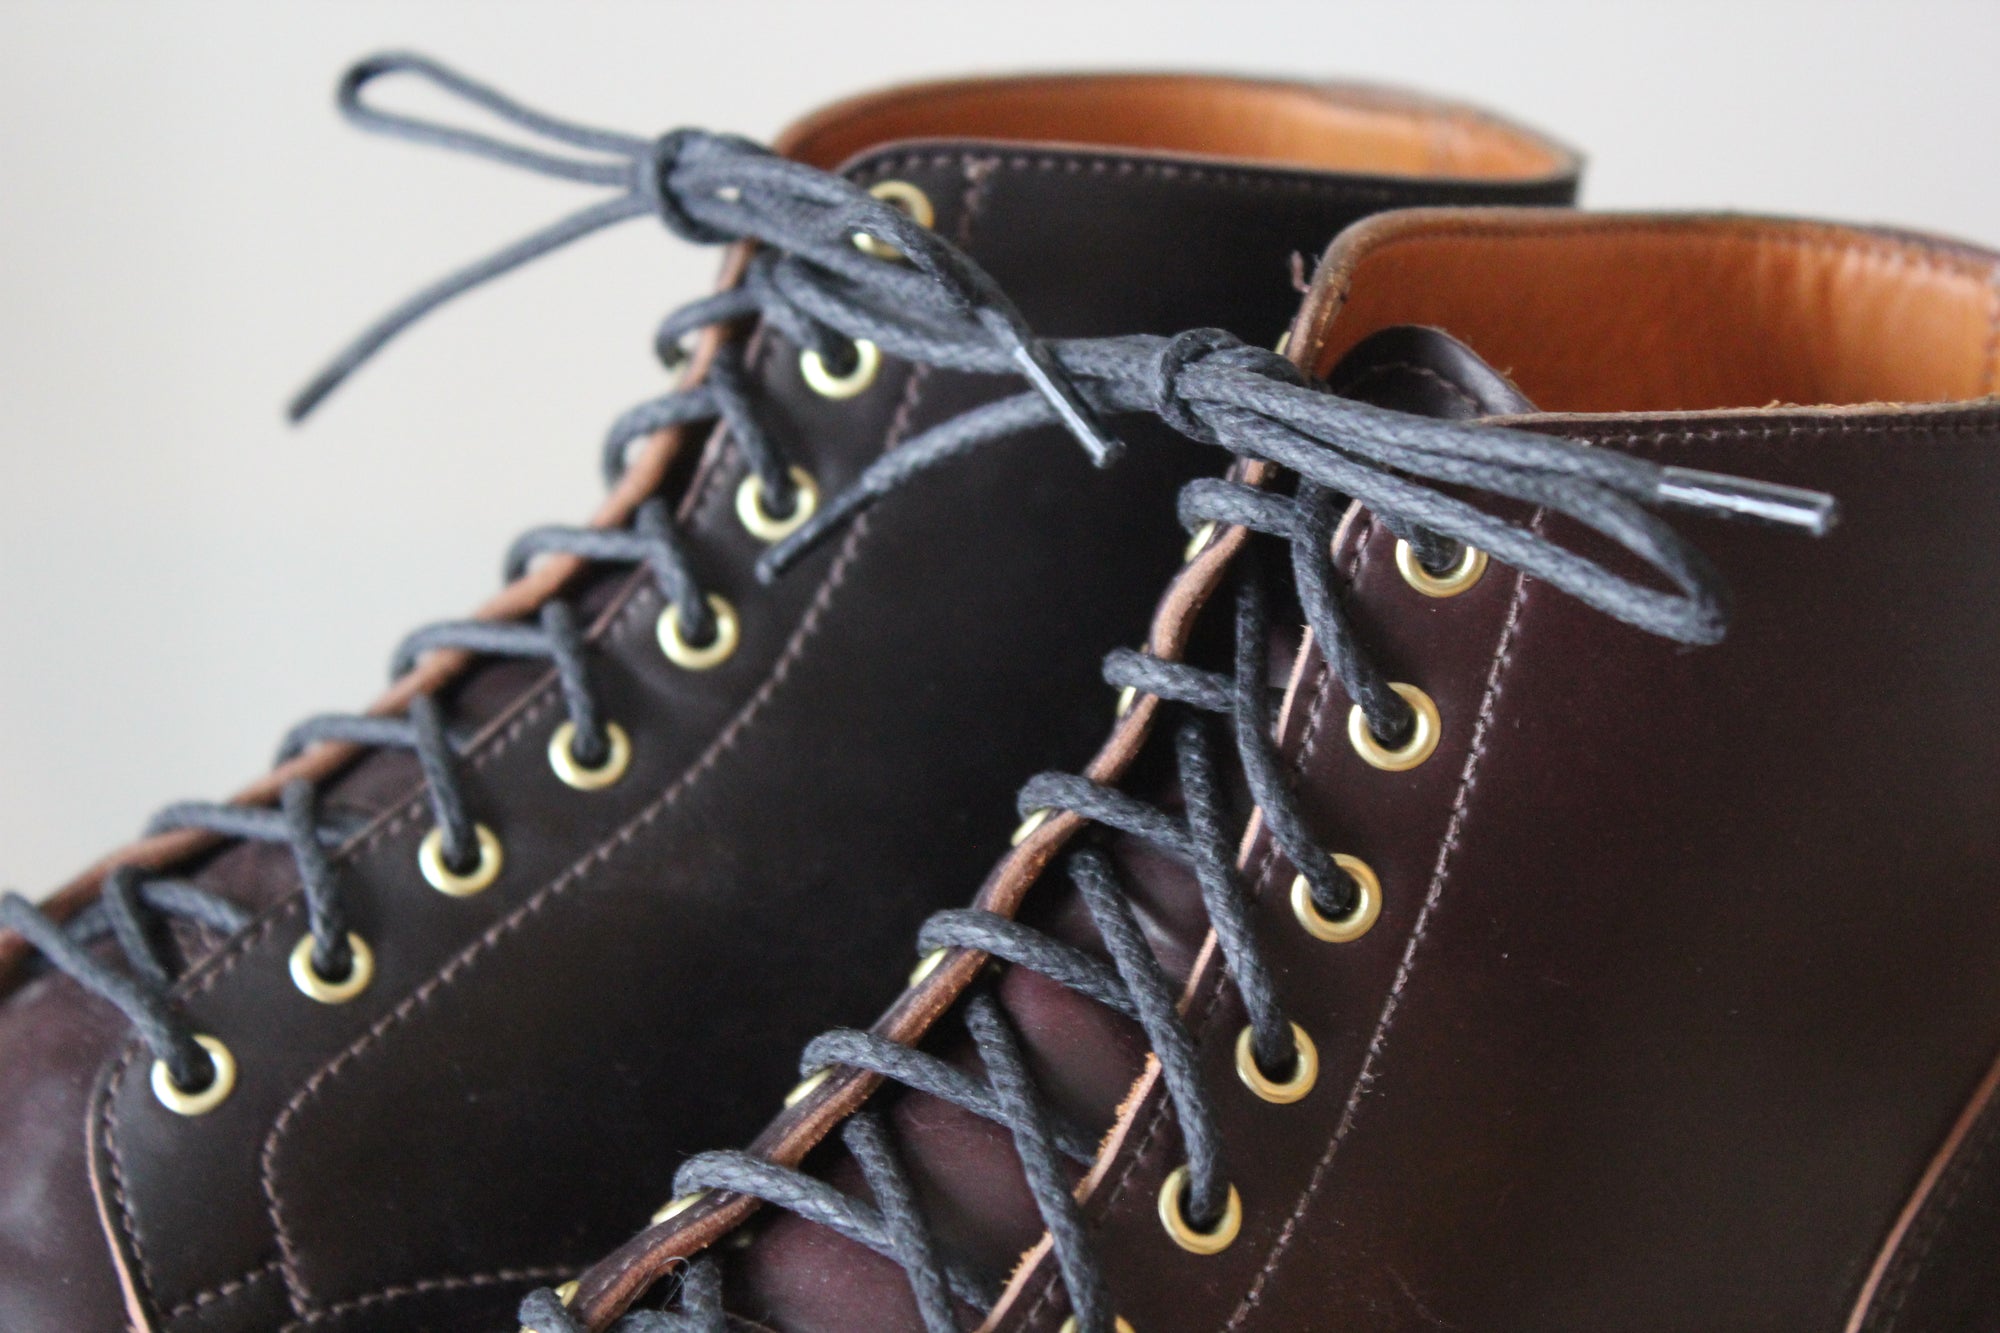 The Best Laces for Every Type of Boot